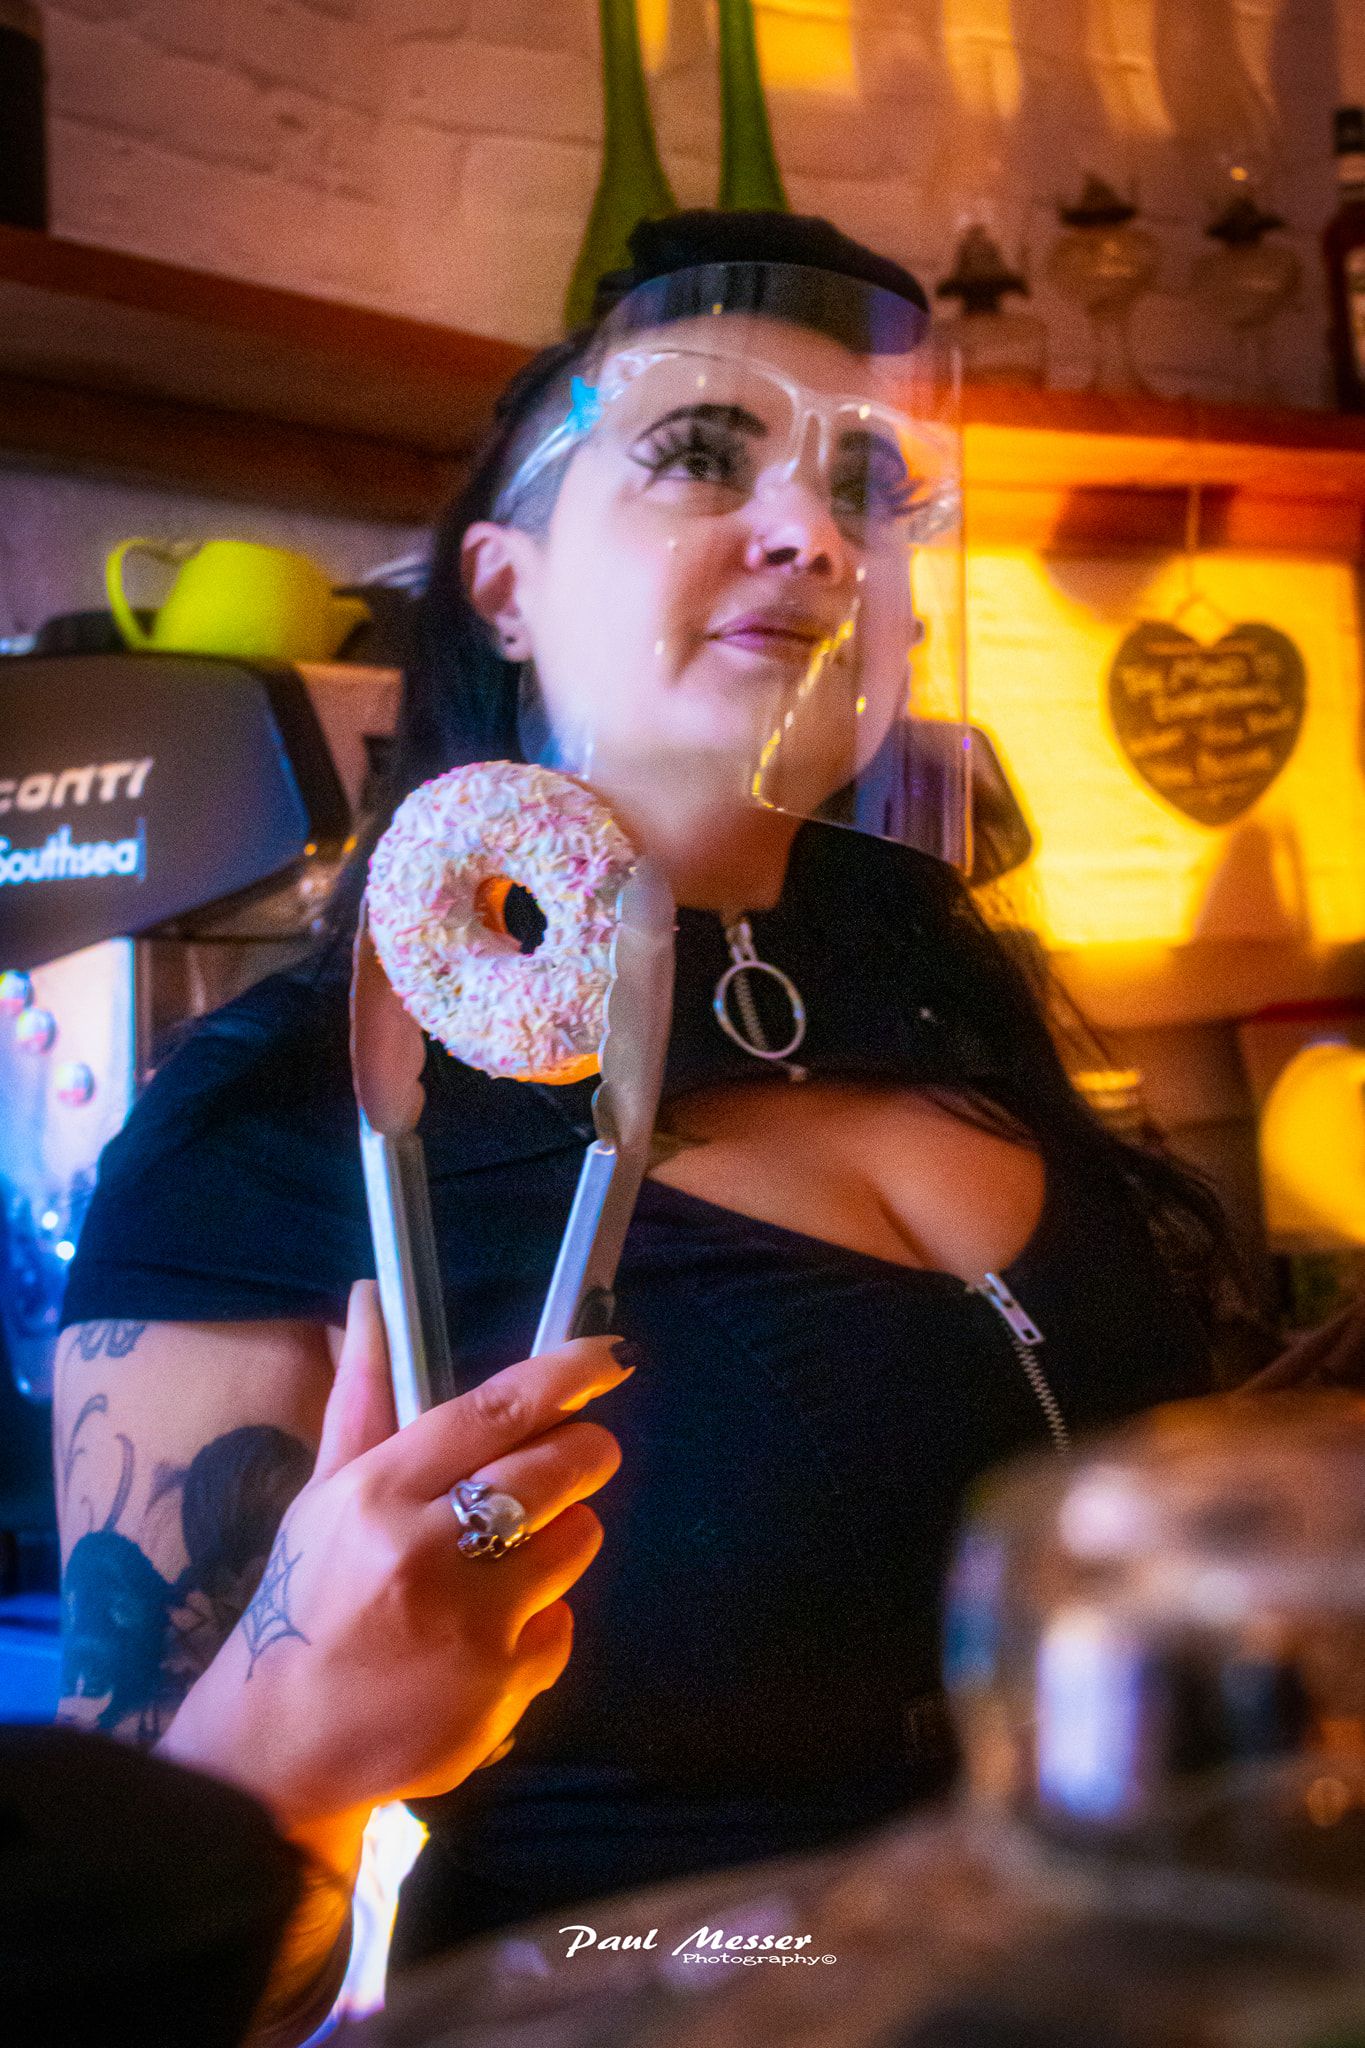 Dominique of The Rabbit Hole holding up a donut behind the coffee bar counter